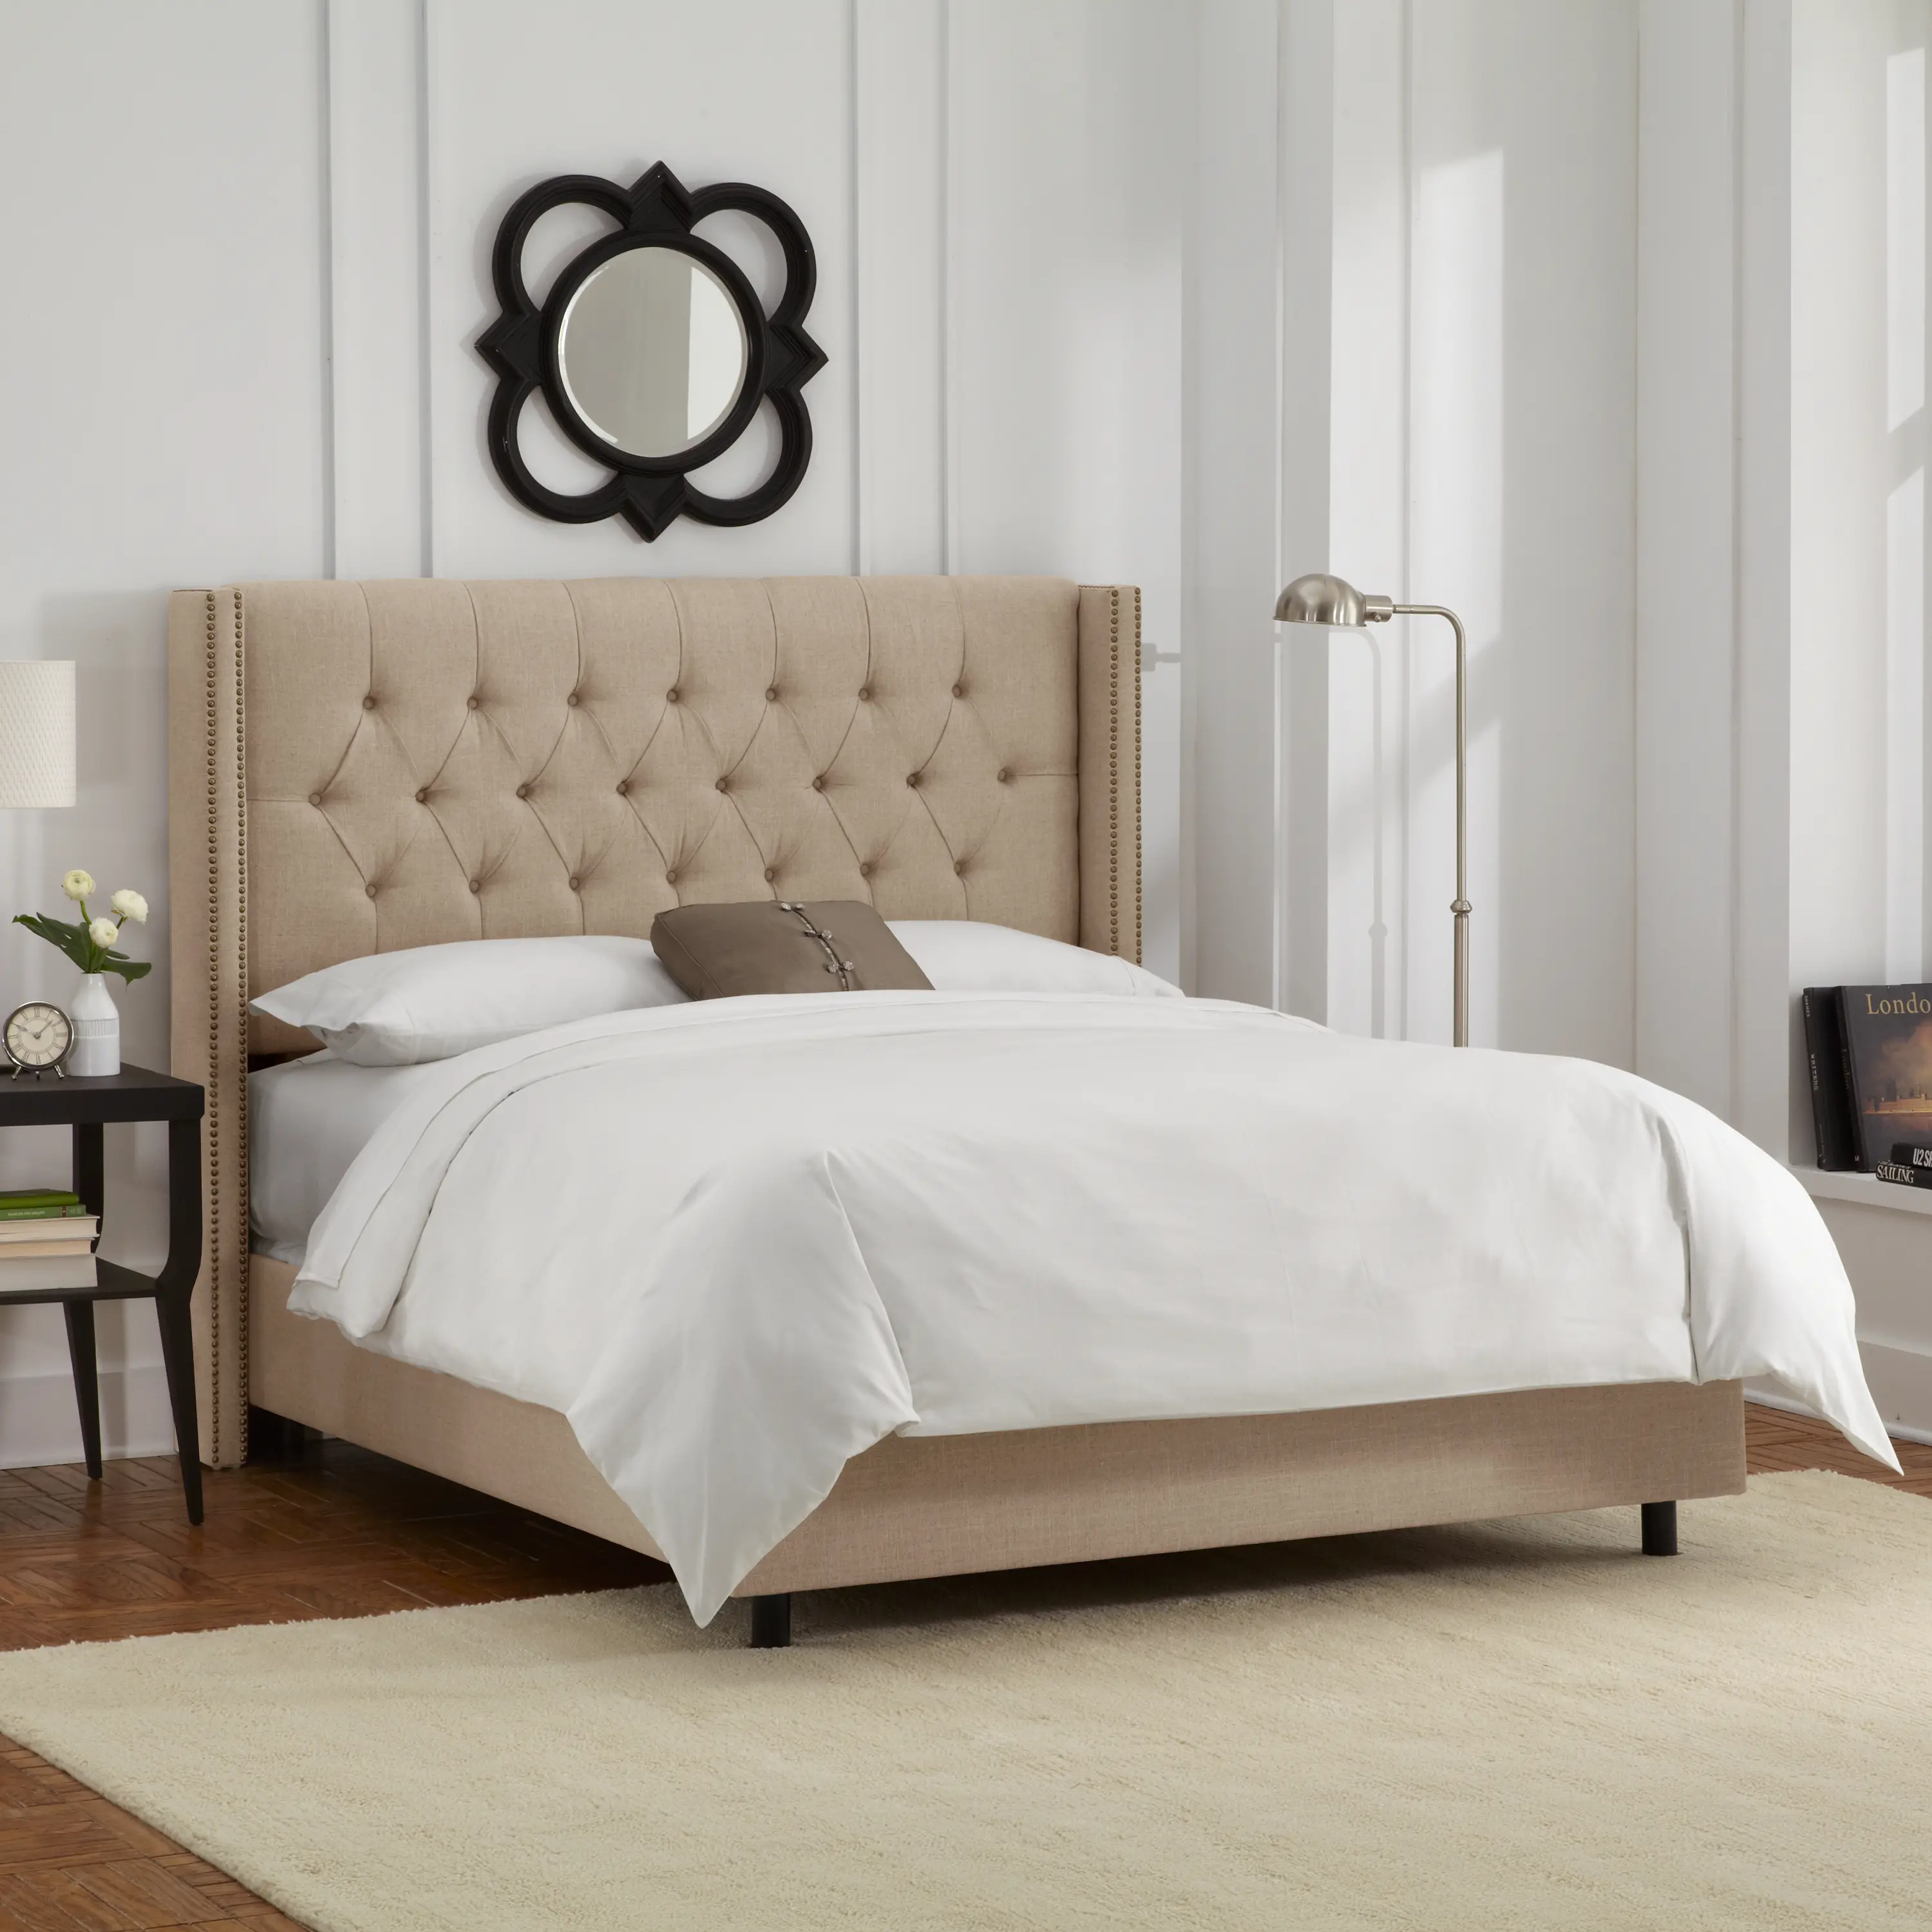 Abigail Linen Sandstone Tufted Wingback Queen Bed - Skyline Furniture